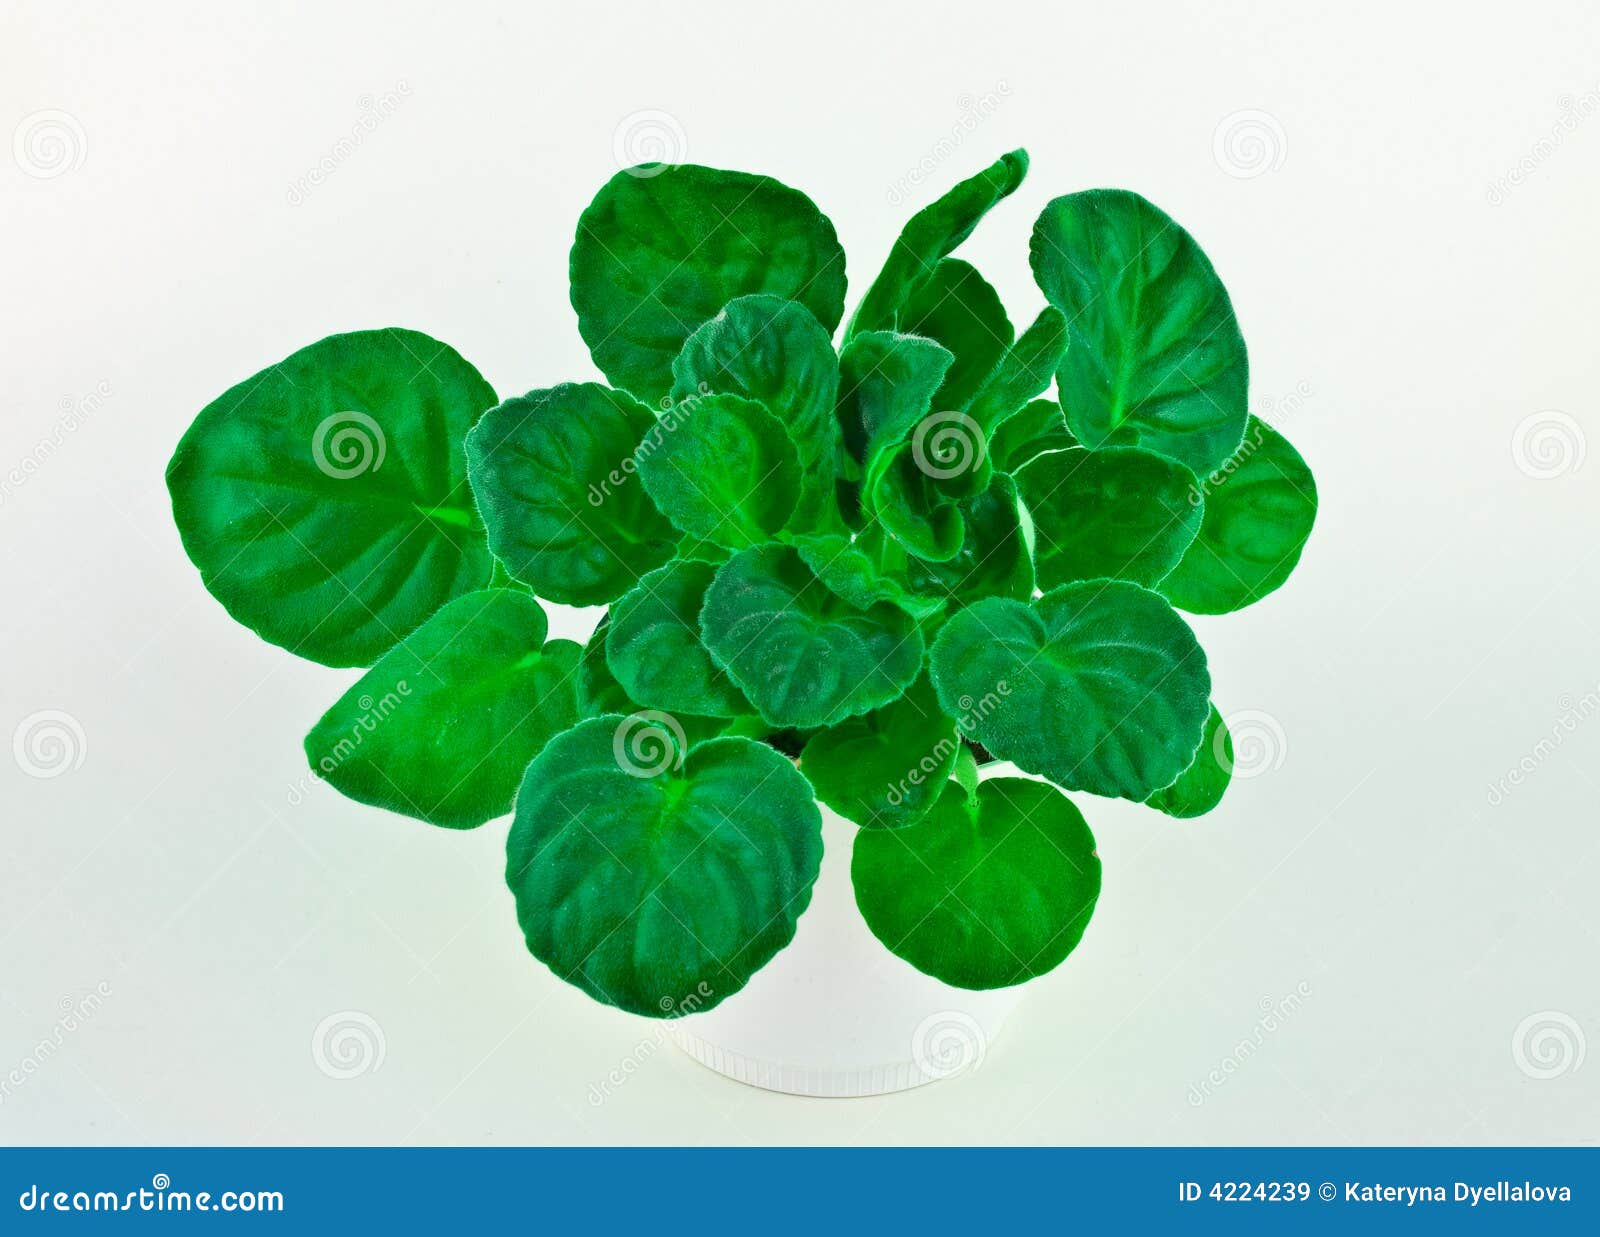 clipart african violets - photo #47